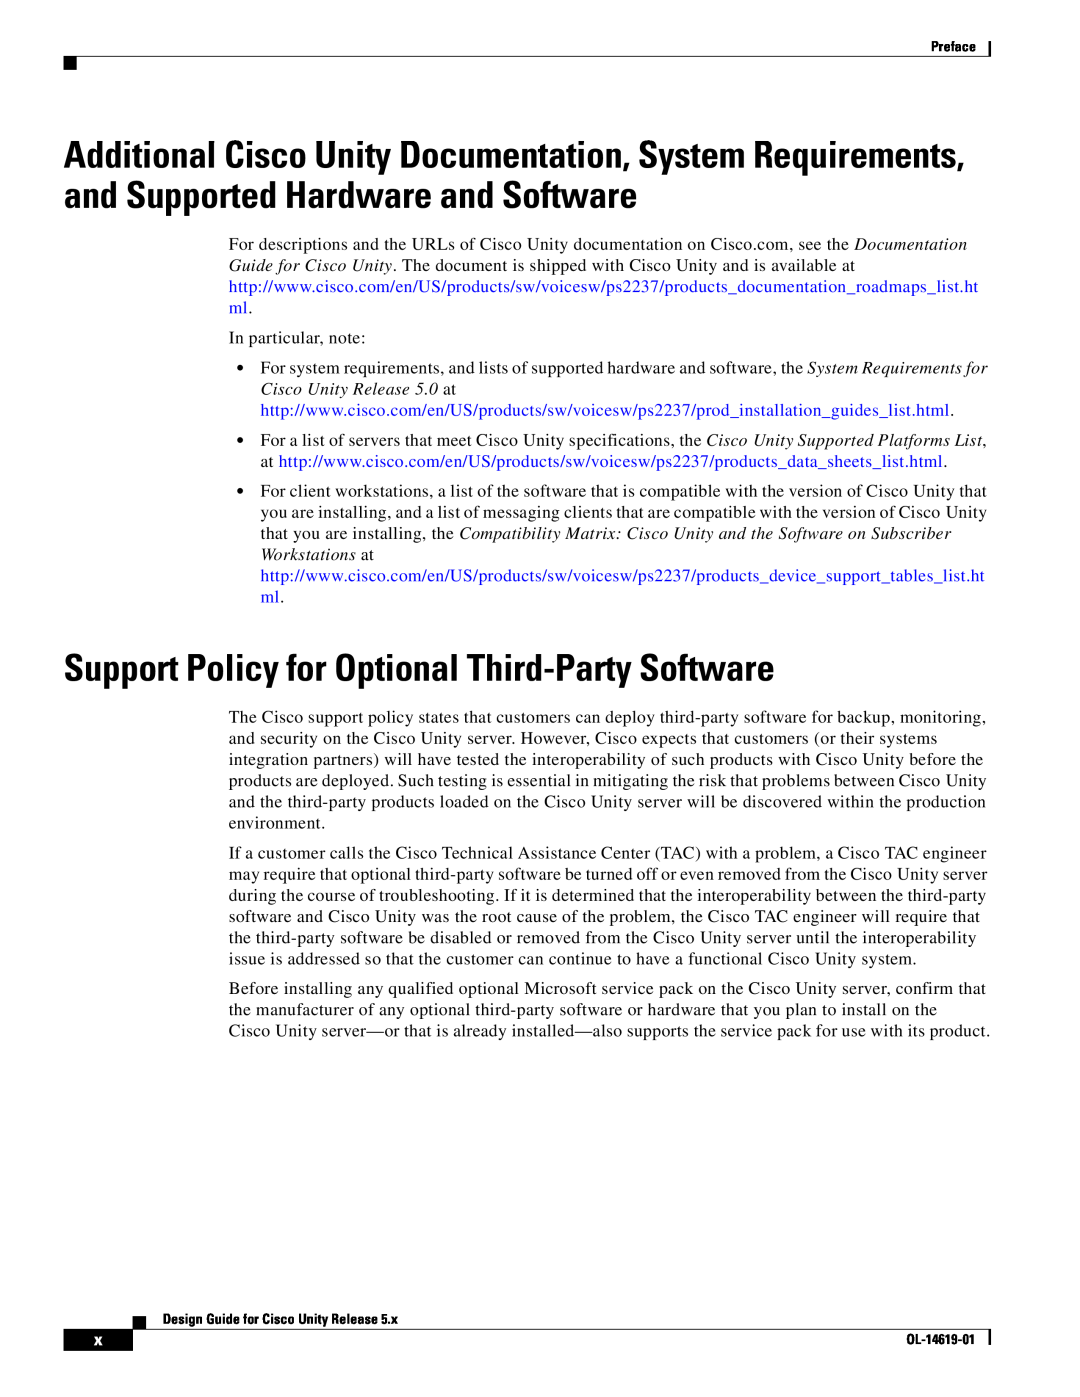 Cisco Systems OL-14619-01 manual Support Policy for Optional Third-Party Software 